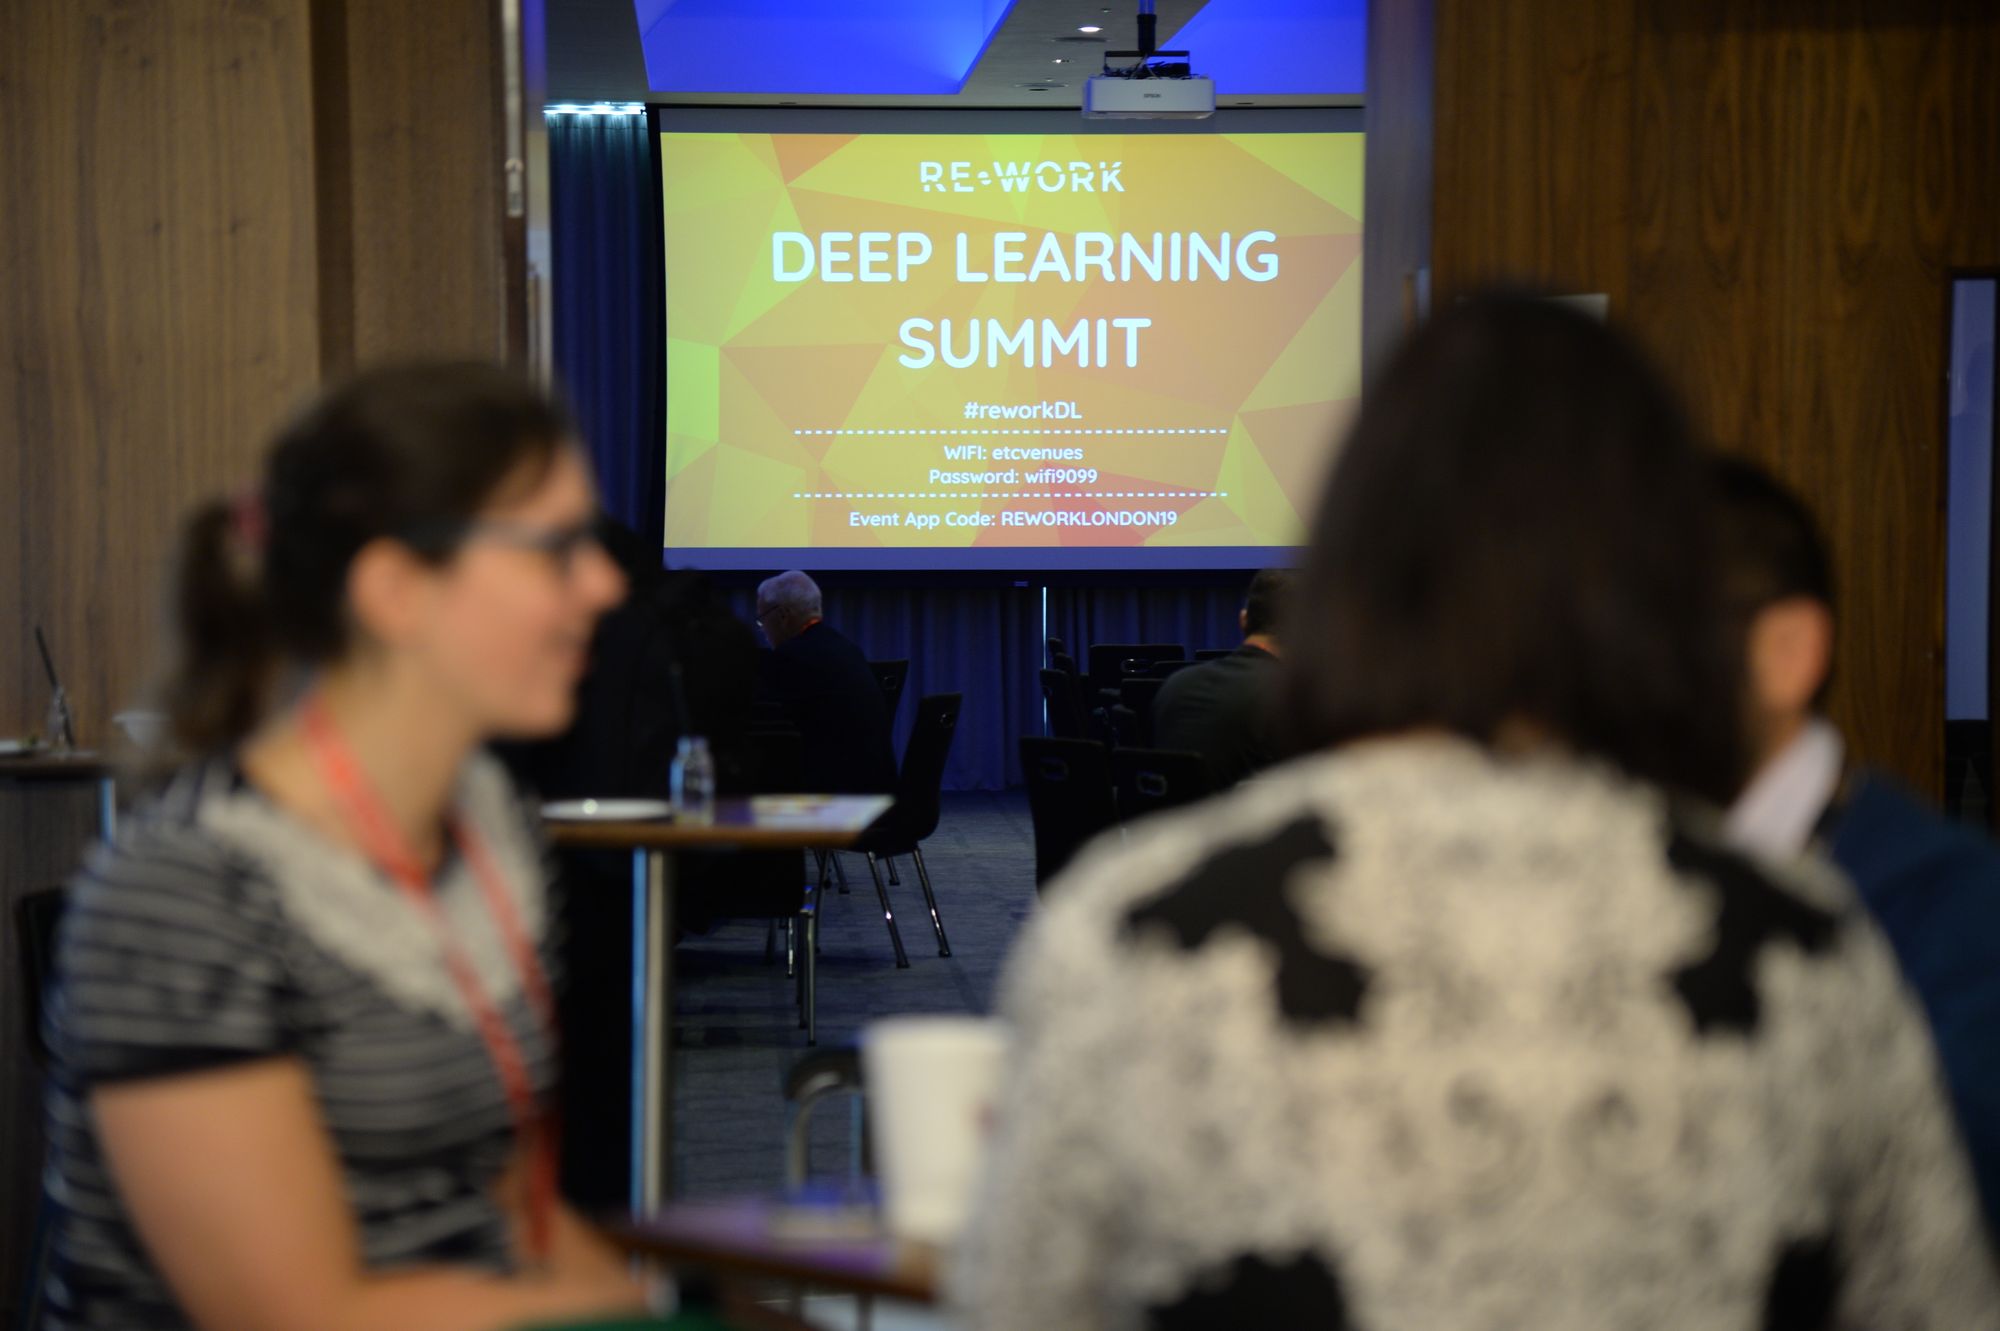 Deep Learning & AI in London, Day 2: What Did You Miss From Global Experts?